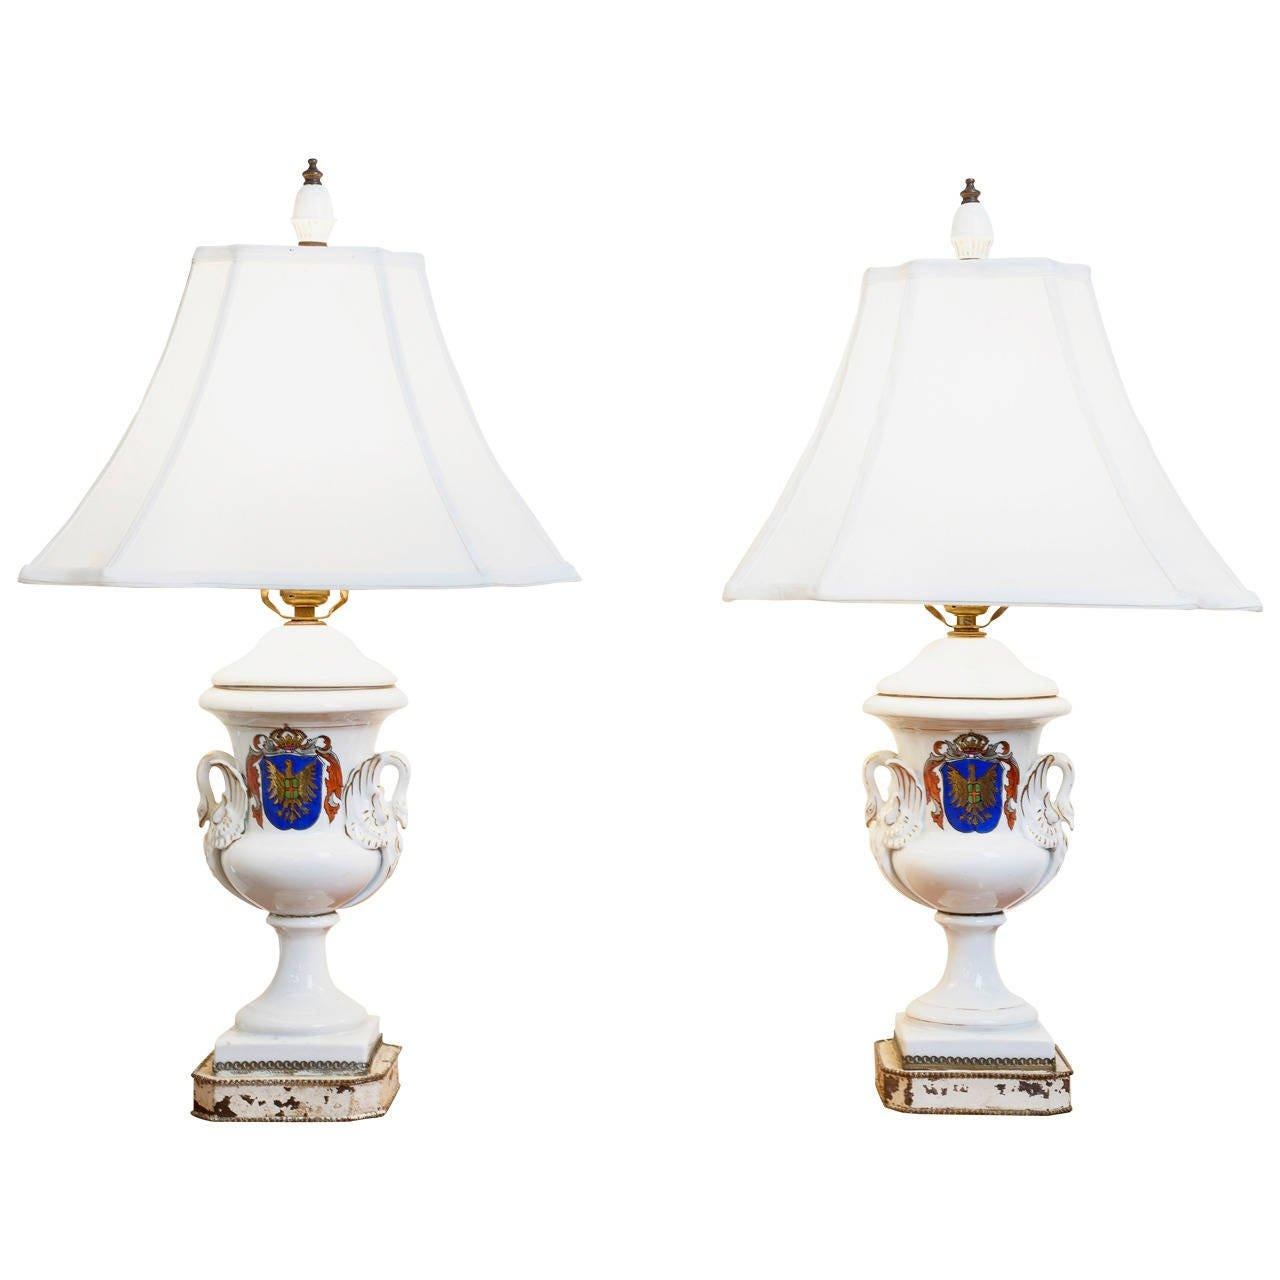 Neoclassical Pair of Old Paris Armorial Urn Lamps, 19th Century France For Sale